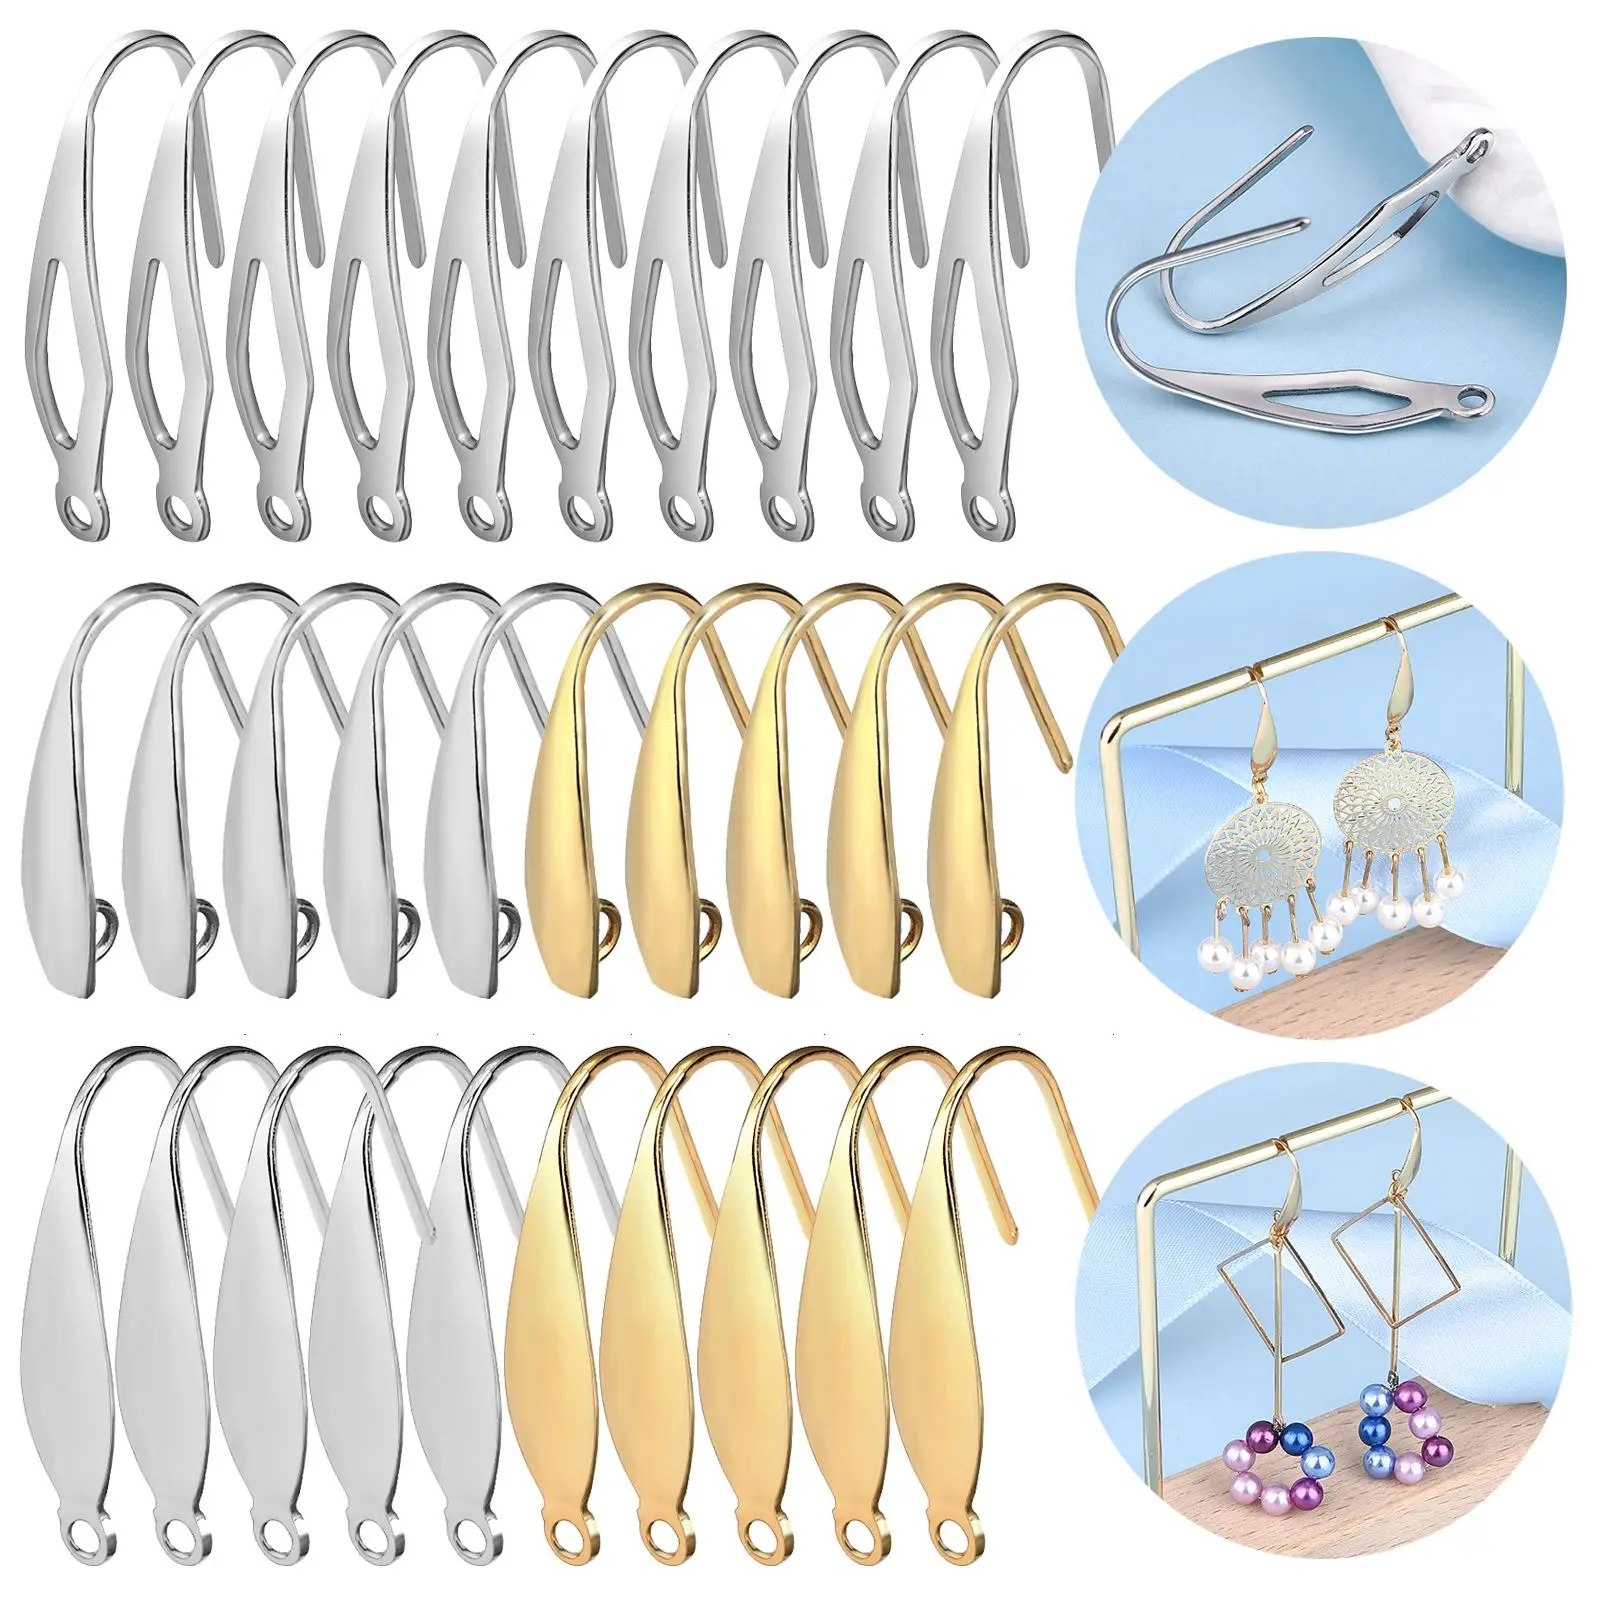 10pcs 316 Stainless Steel Earring Hooks Posts Connector For Glod Steel Earings Connertor DIY Earring Jewelry Making Accessories